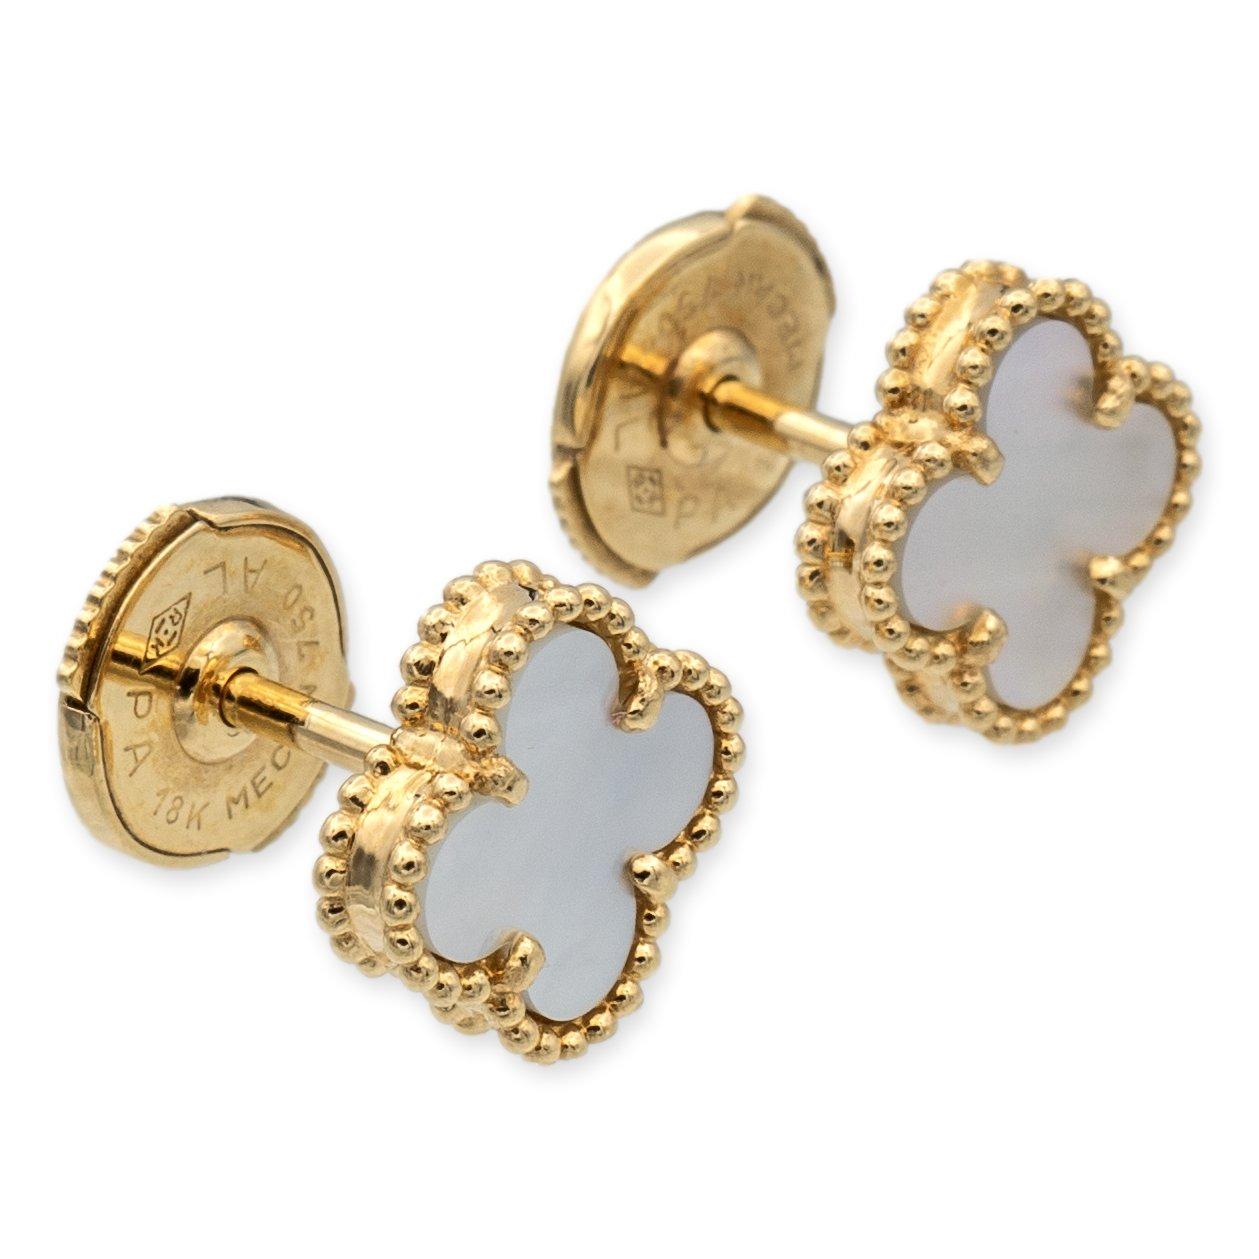 Van Cleef & Arpels stud earrings from the Alhambra collection finely crafted in 18 karat yellow gold featuring mother of pearl centers measuring 9.5 mm (0.37 in) with friction back posts and butterfly backs. Fully hallmarked with logo, serial